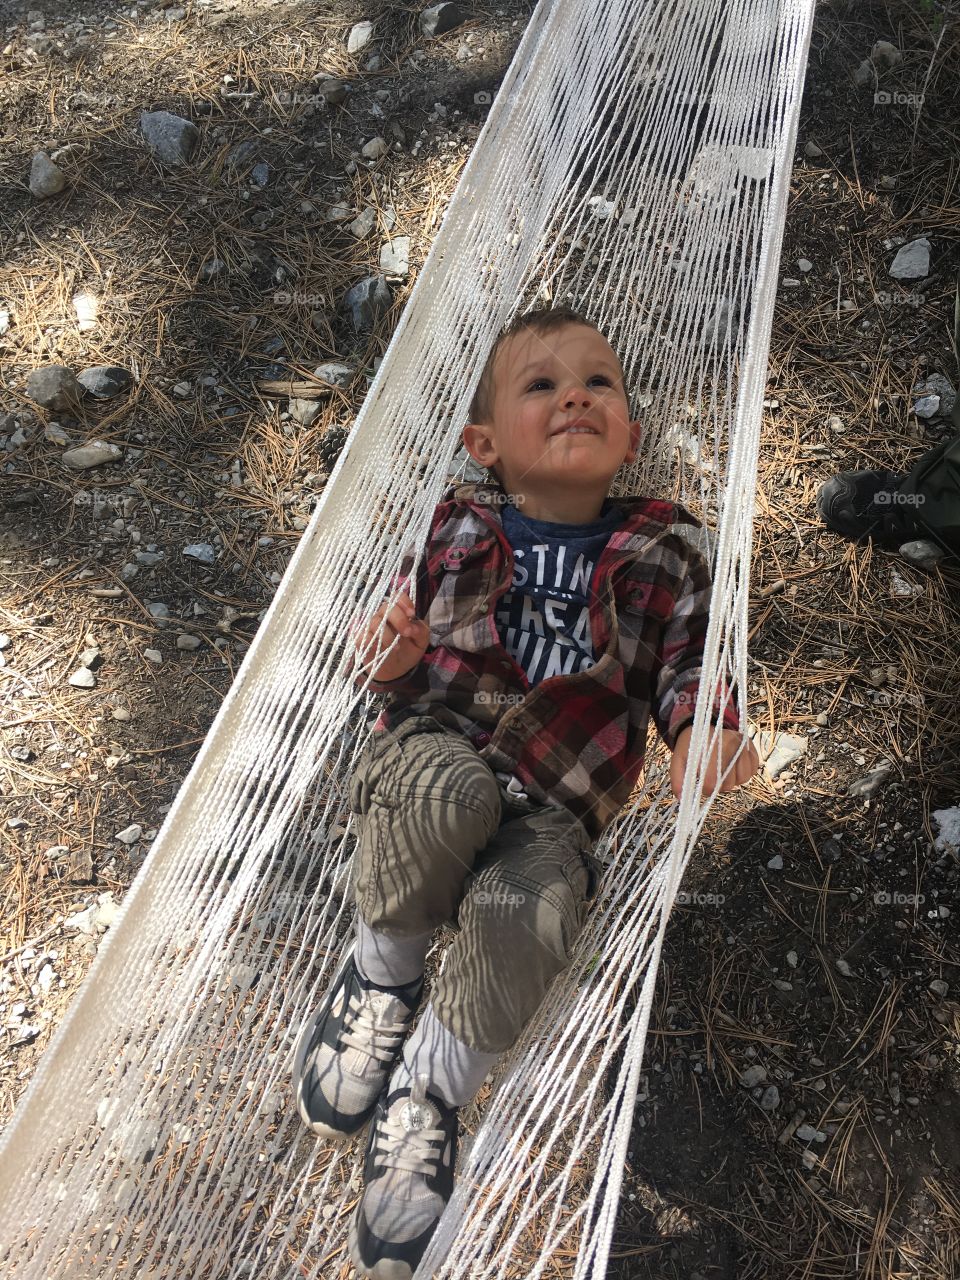 An adorable toddler boy wearing a red flannel shirt out camping hanging in a hammock looking up at the sky, smiling.